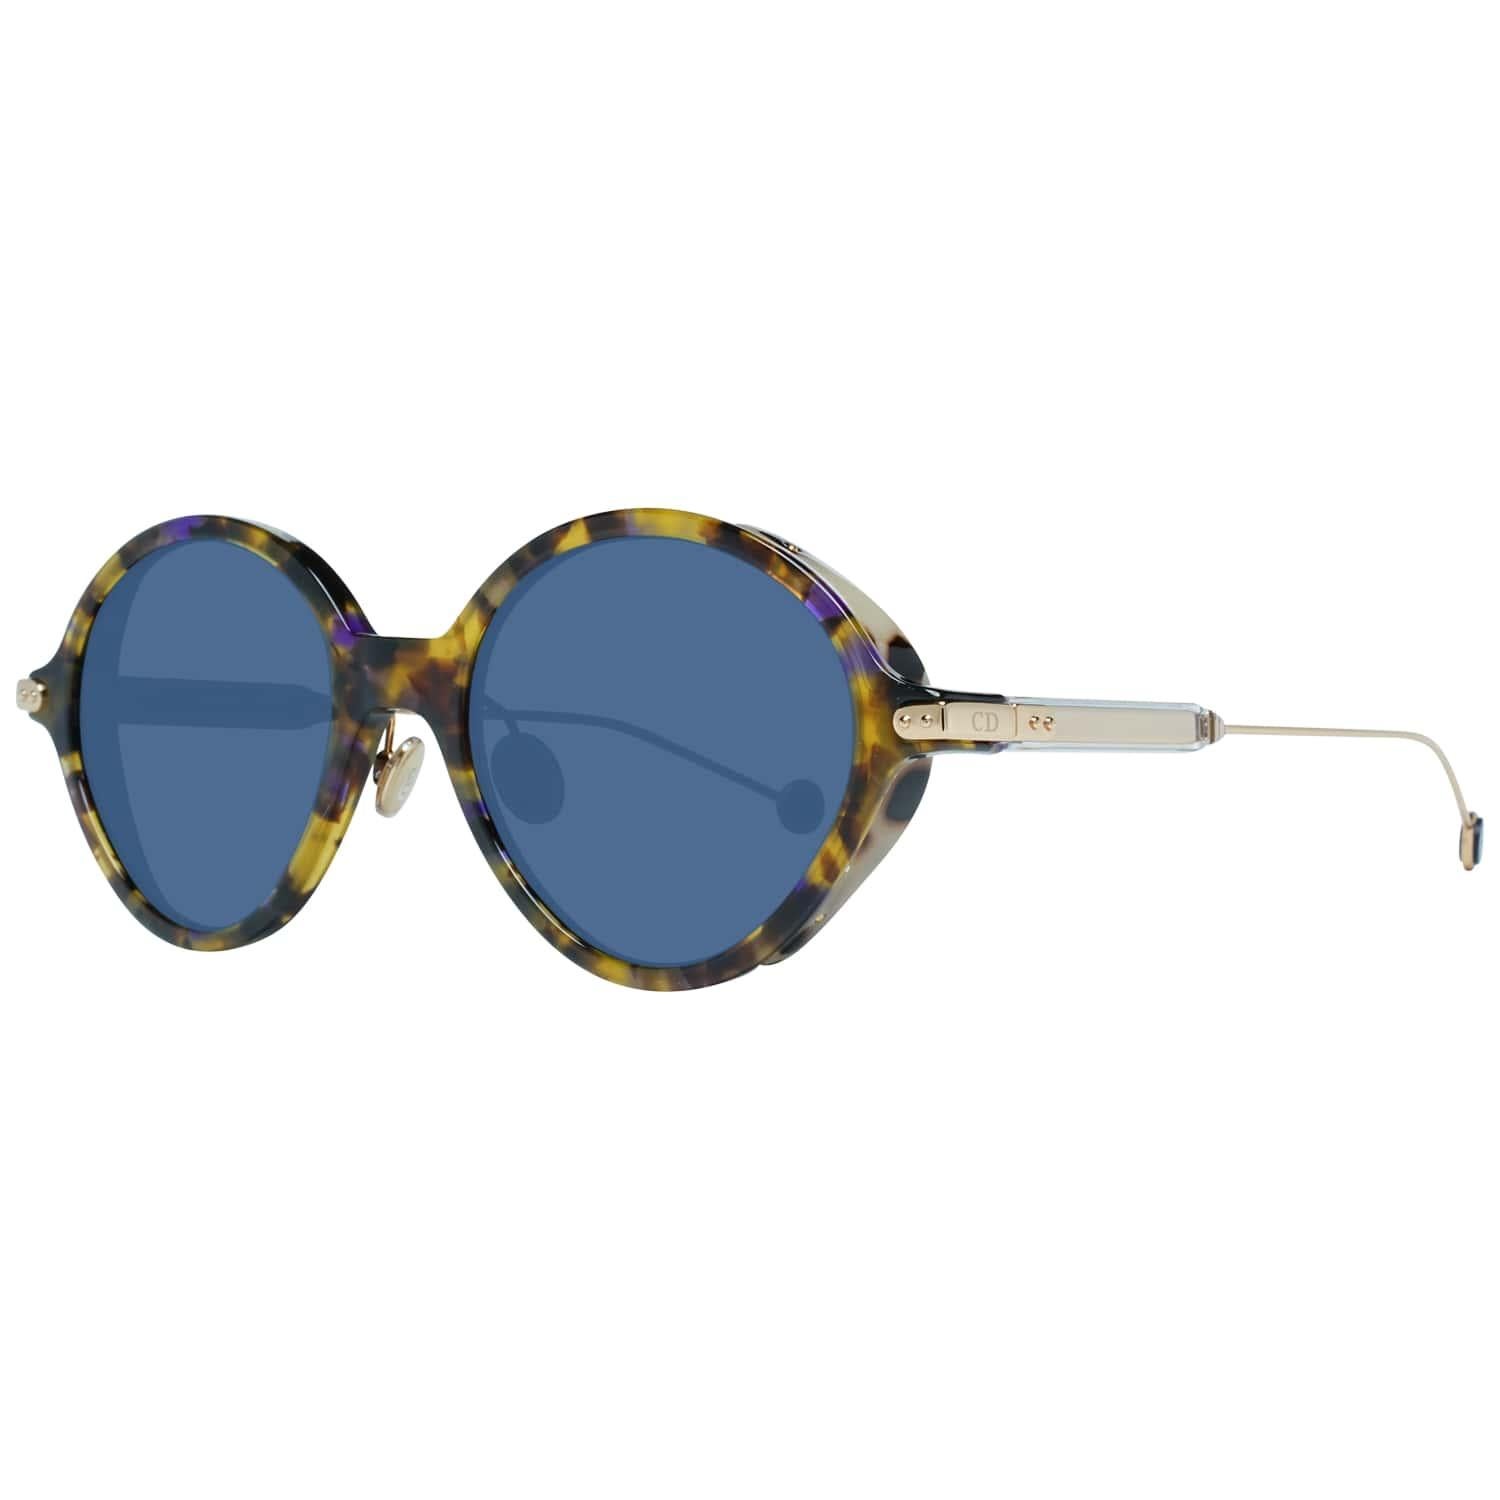 Details

MATERIAL: Metal

COLOR: Multicolor

MODEL: Diorumbrage 520X4

GENDER: Women

COUNTRY OF MANUFACTURE: Italy

TYPE: Sunglasses

ORIGINAL CASE?: Yes

STYLE: Oval

OCCASION: Casual

FEATURES: Lightweight

LENS COLOR: Blue

LENS TECHNOLOGY: No